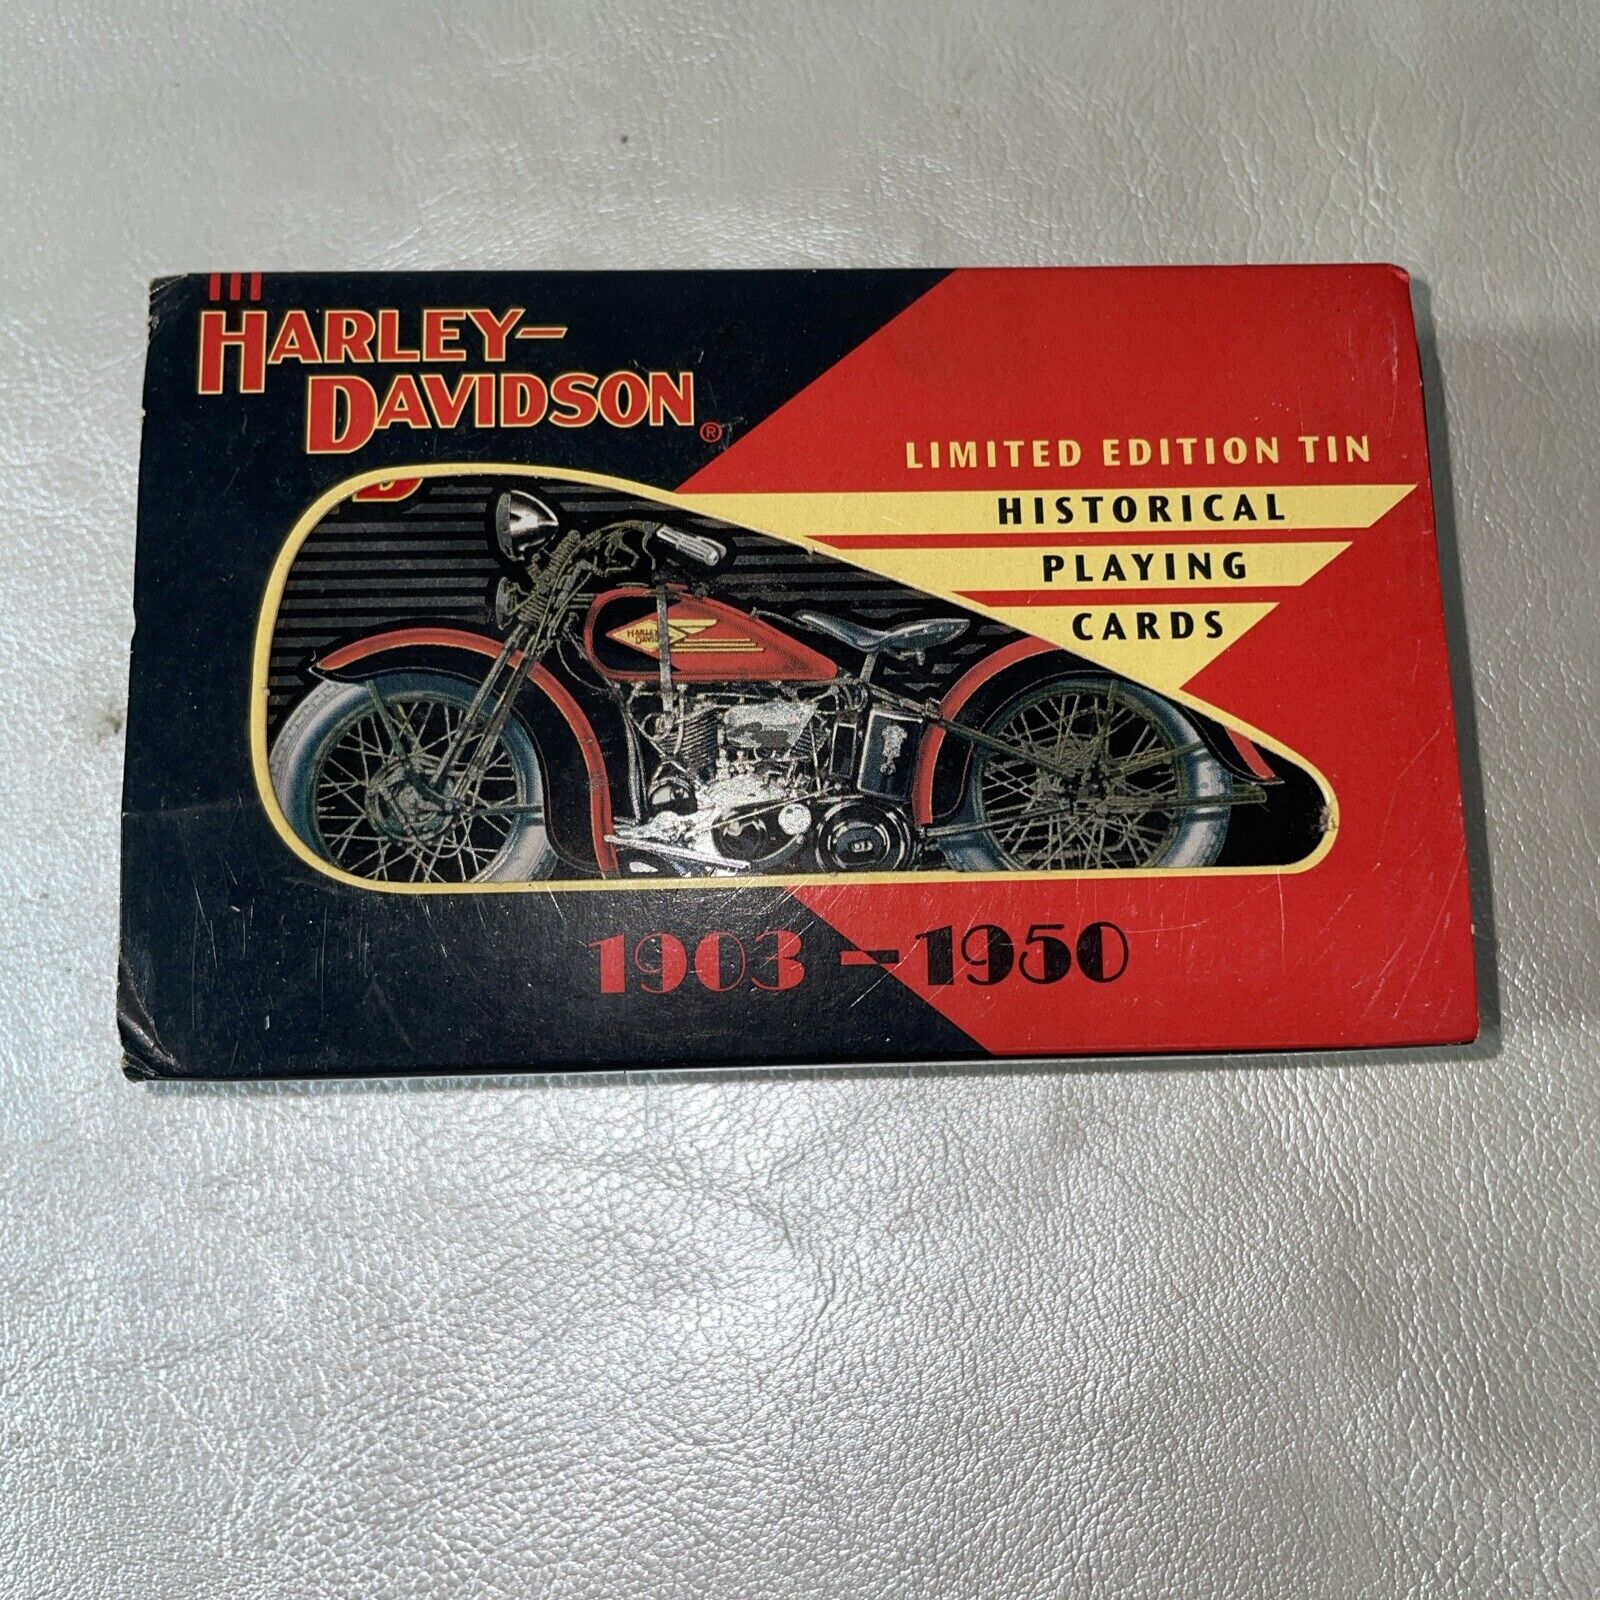 Harley Davidson Limited Edition Historical Playing Cards 1903-1950 Sealed